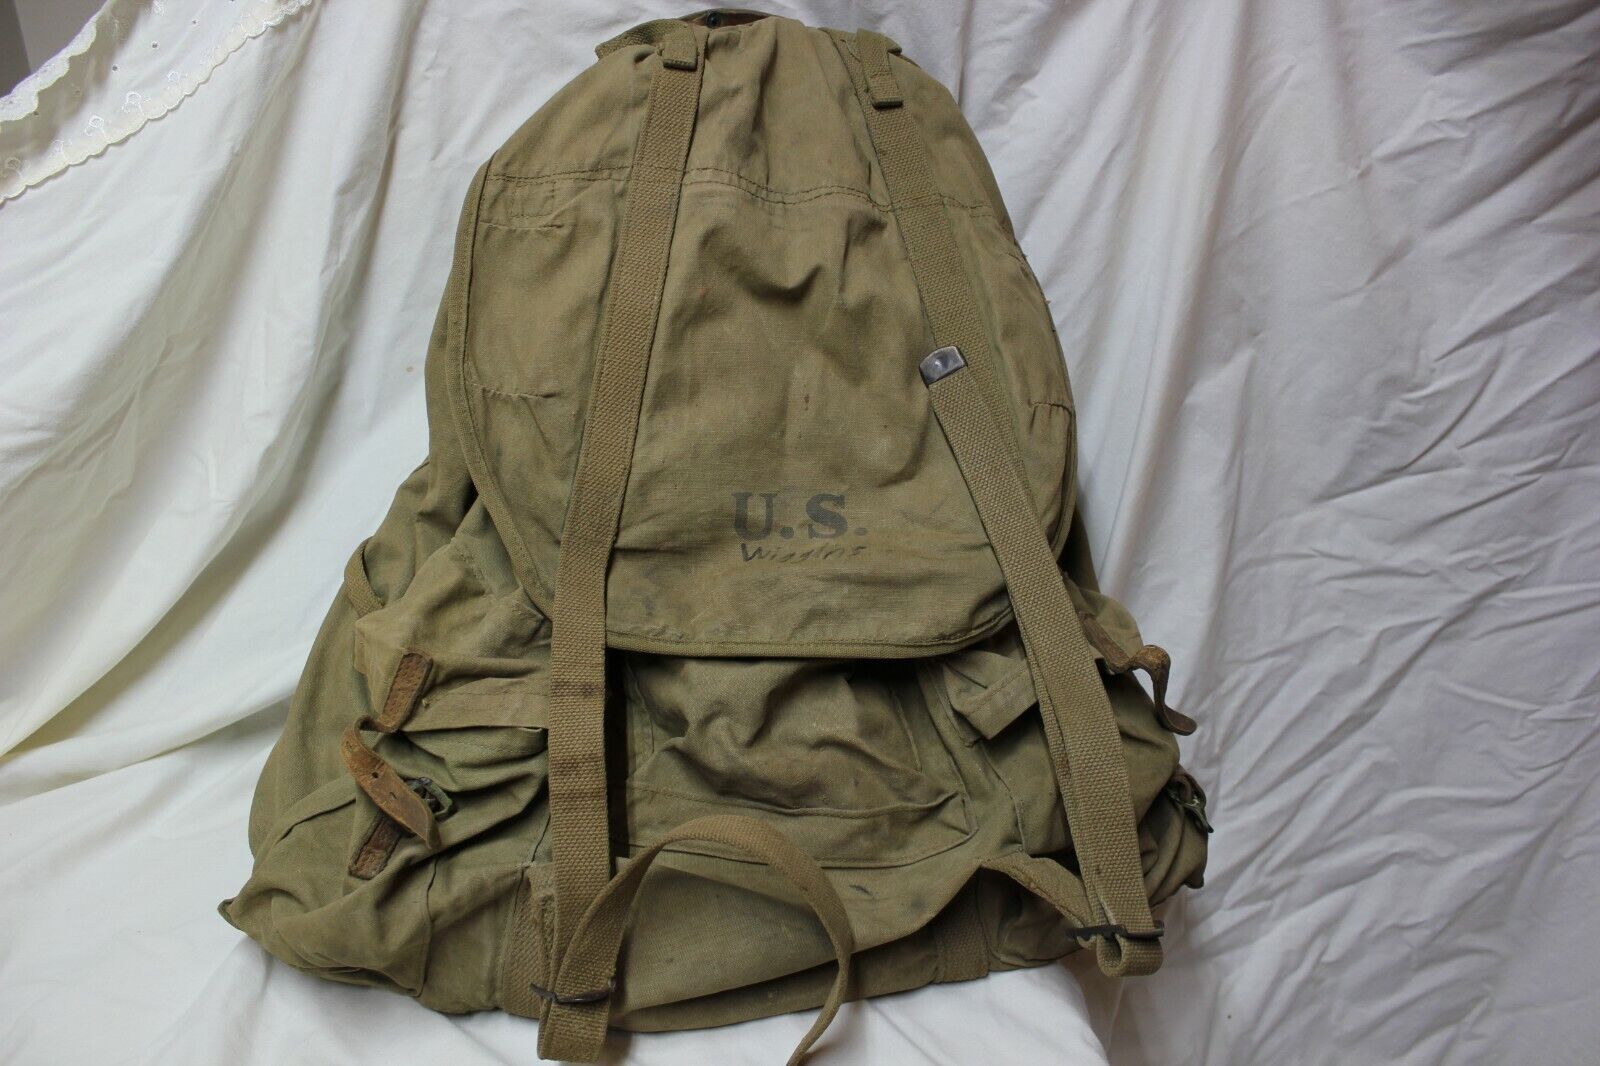 US Military Issue WW2 WWII ARMY MARINE COMBAT FIELD PACK Backpack Original 1942